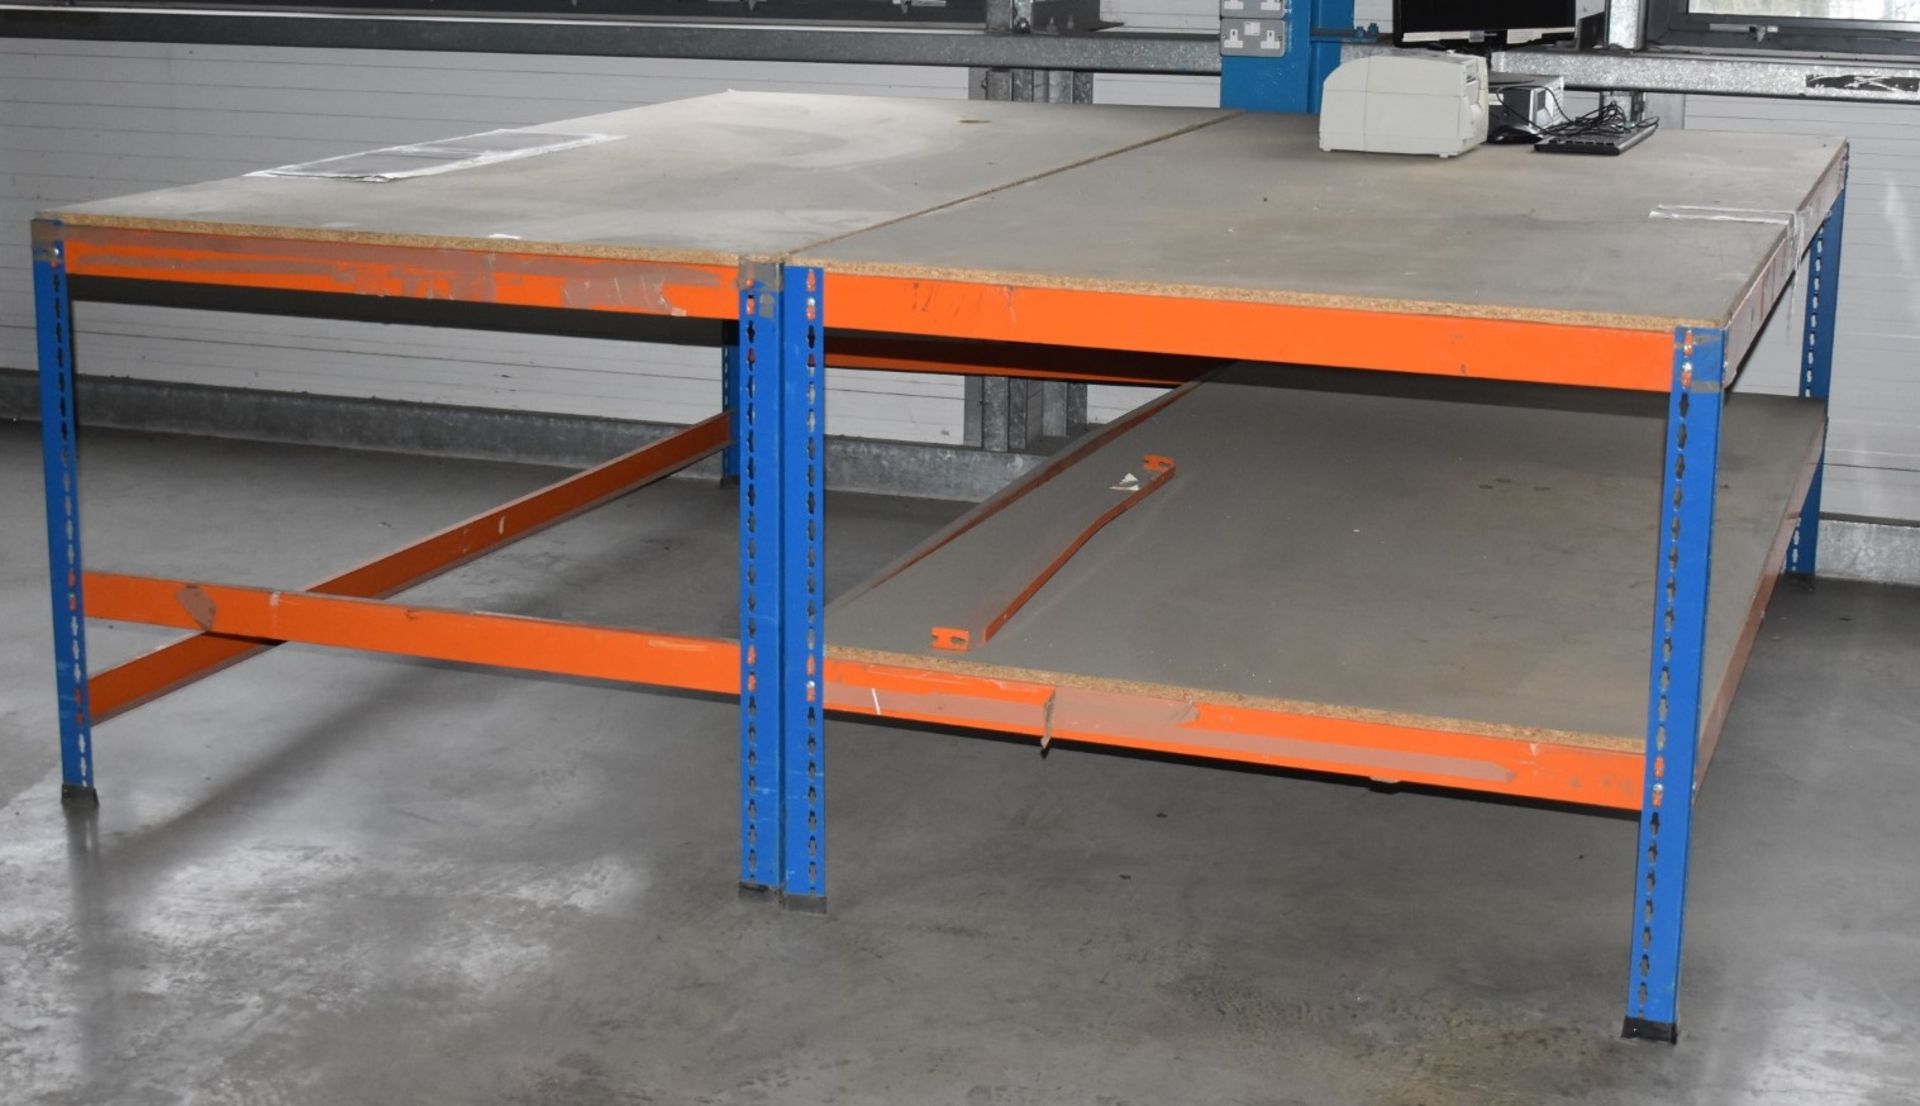 1 x Workbenches With Metal Frames - Dimensions: 120x240cm - Ref FE261 - CL480 - Location: Nottingham